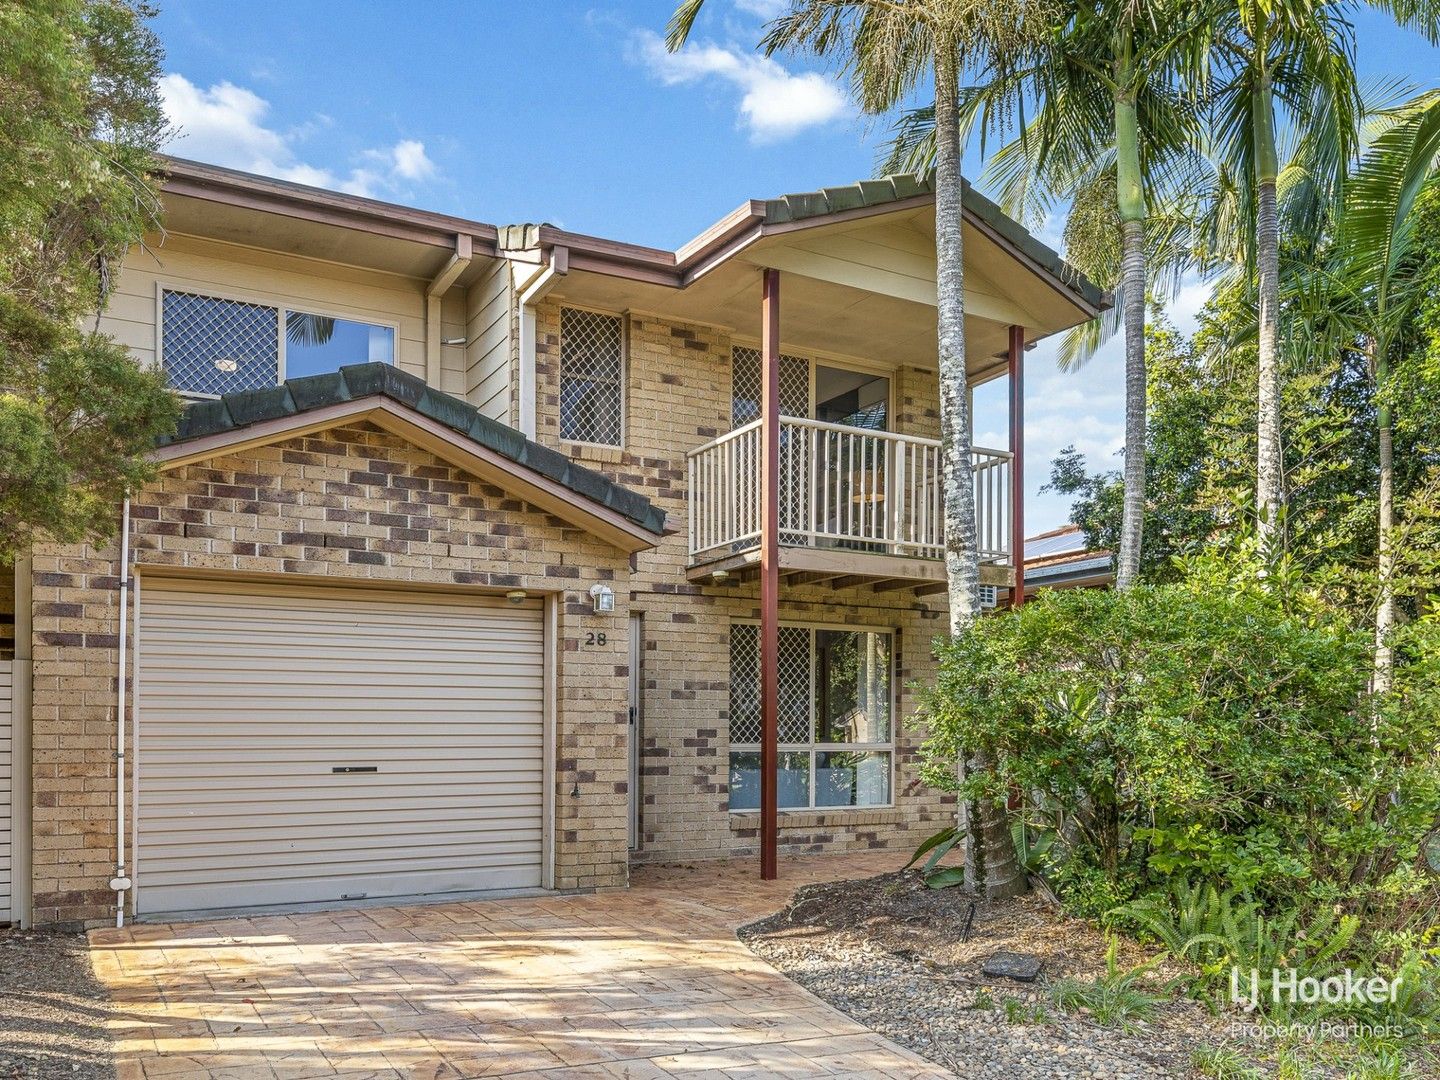 3 bedrooms Townhouse in 28/12 Grandchester Street SUNNYBANK HILLS QLD, 4109